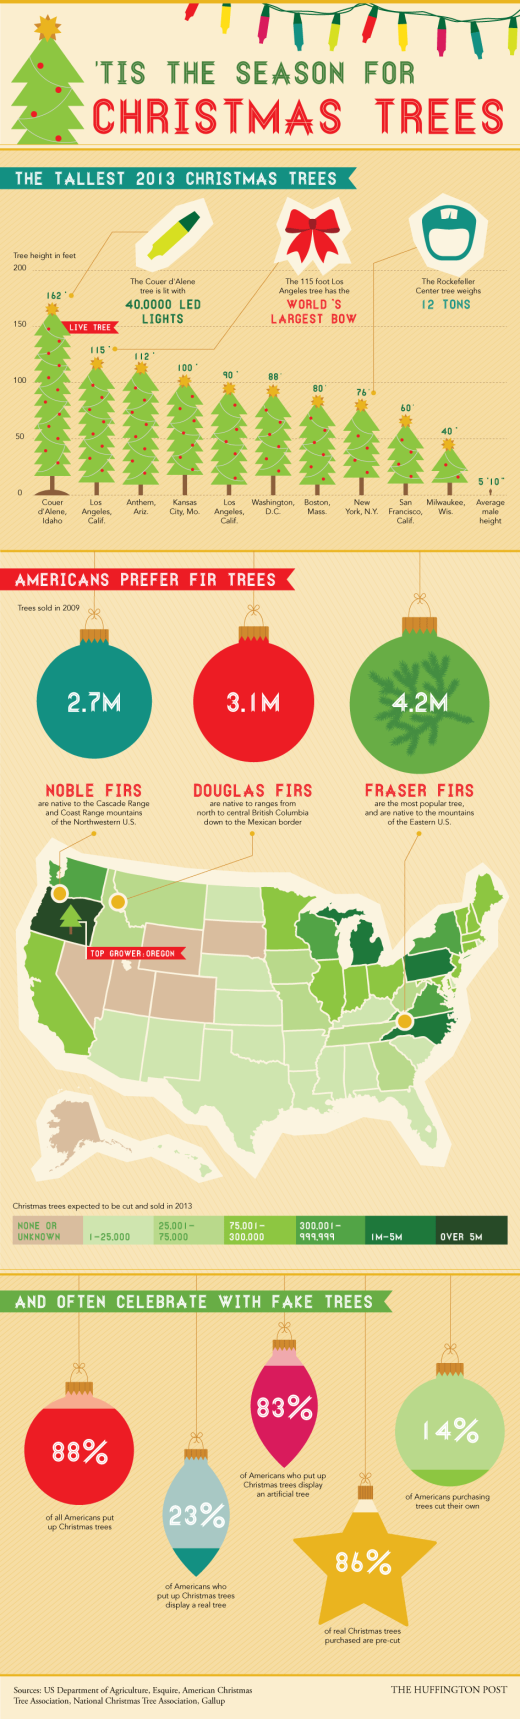 Surprising facts and figures about the season’s trees